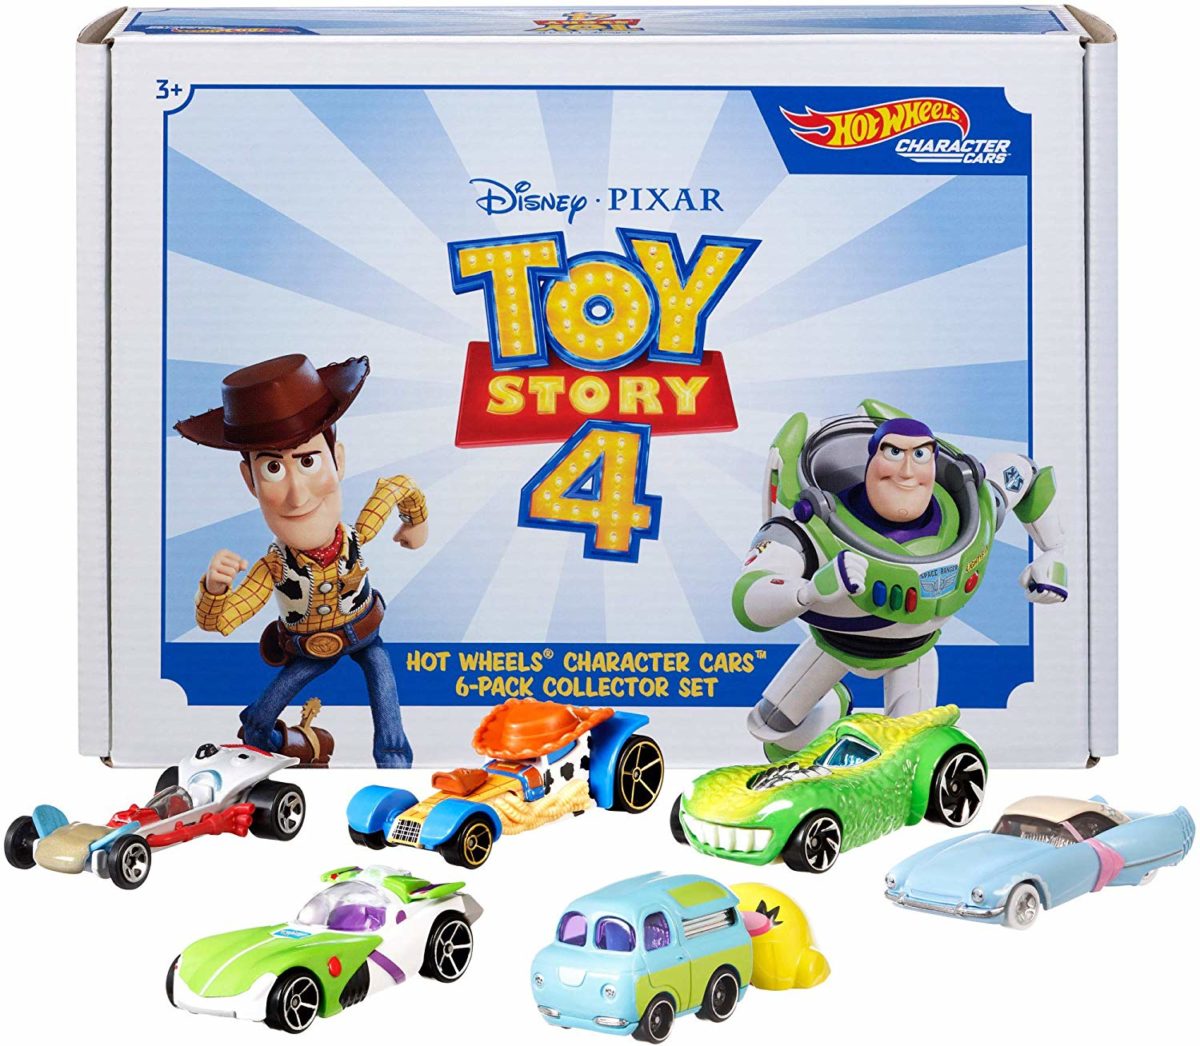 Hot Wheels Disney Pixar Toy Story 4 Character Cars 6 Pack Bundle - Top Toys and Gifts for Five Year Old Boys 1